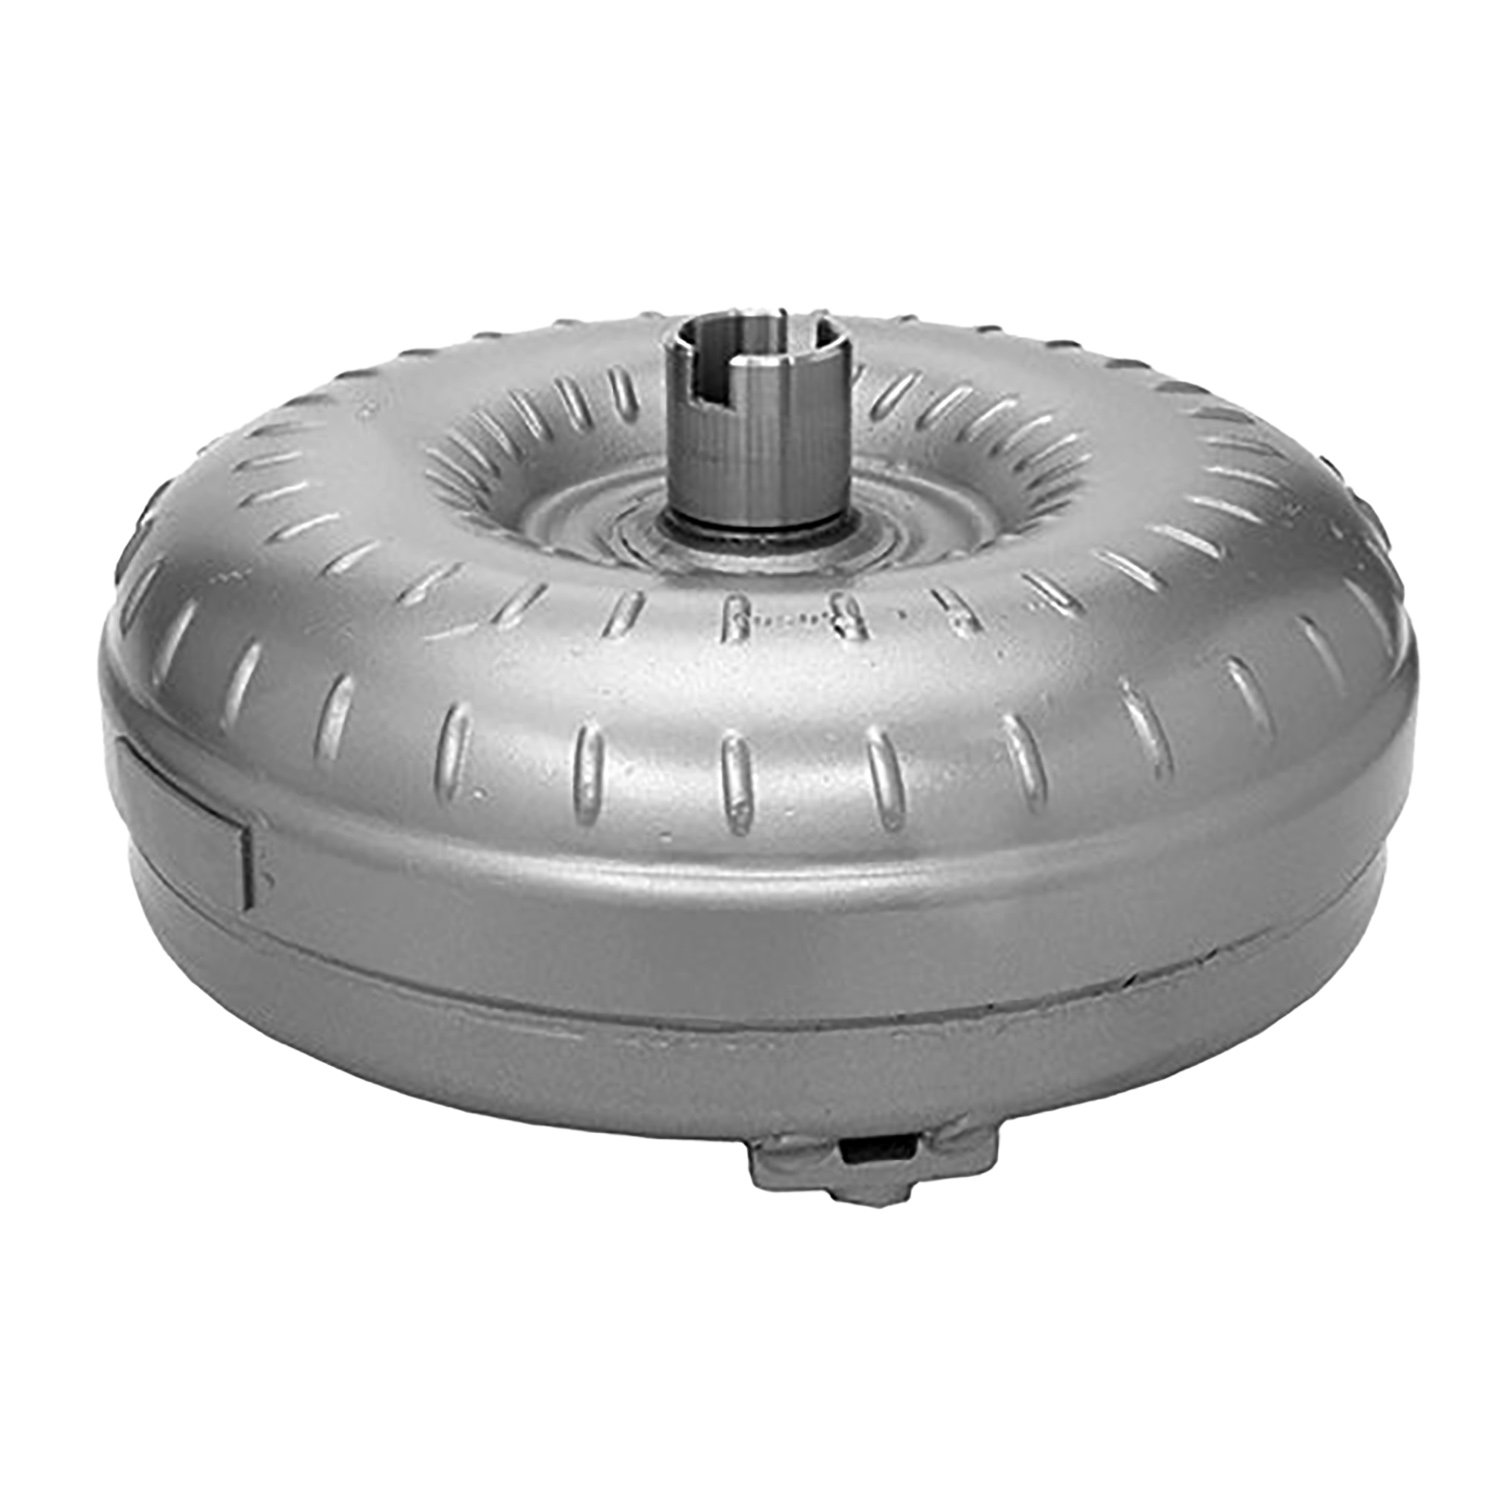 Remanufactured Automatic Transmission Torque Converter for GM TH200/325, 700 Open Static Valve